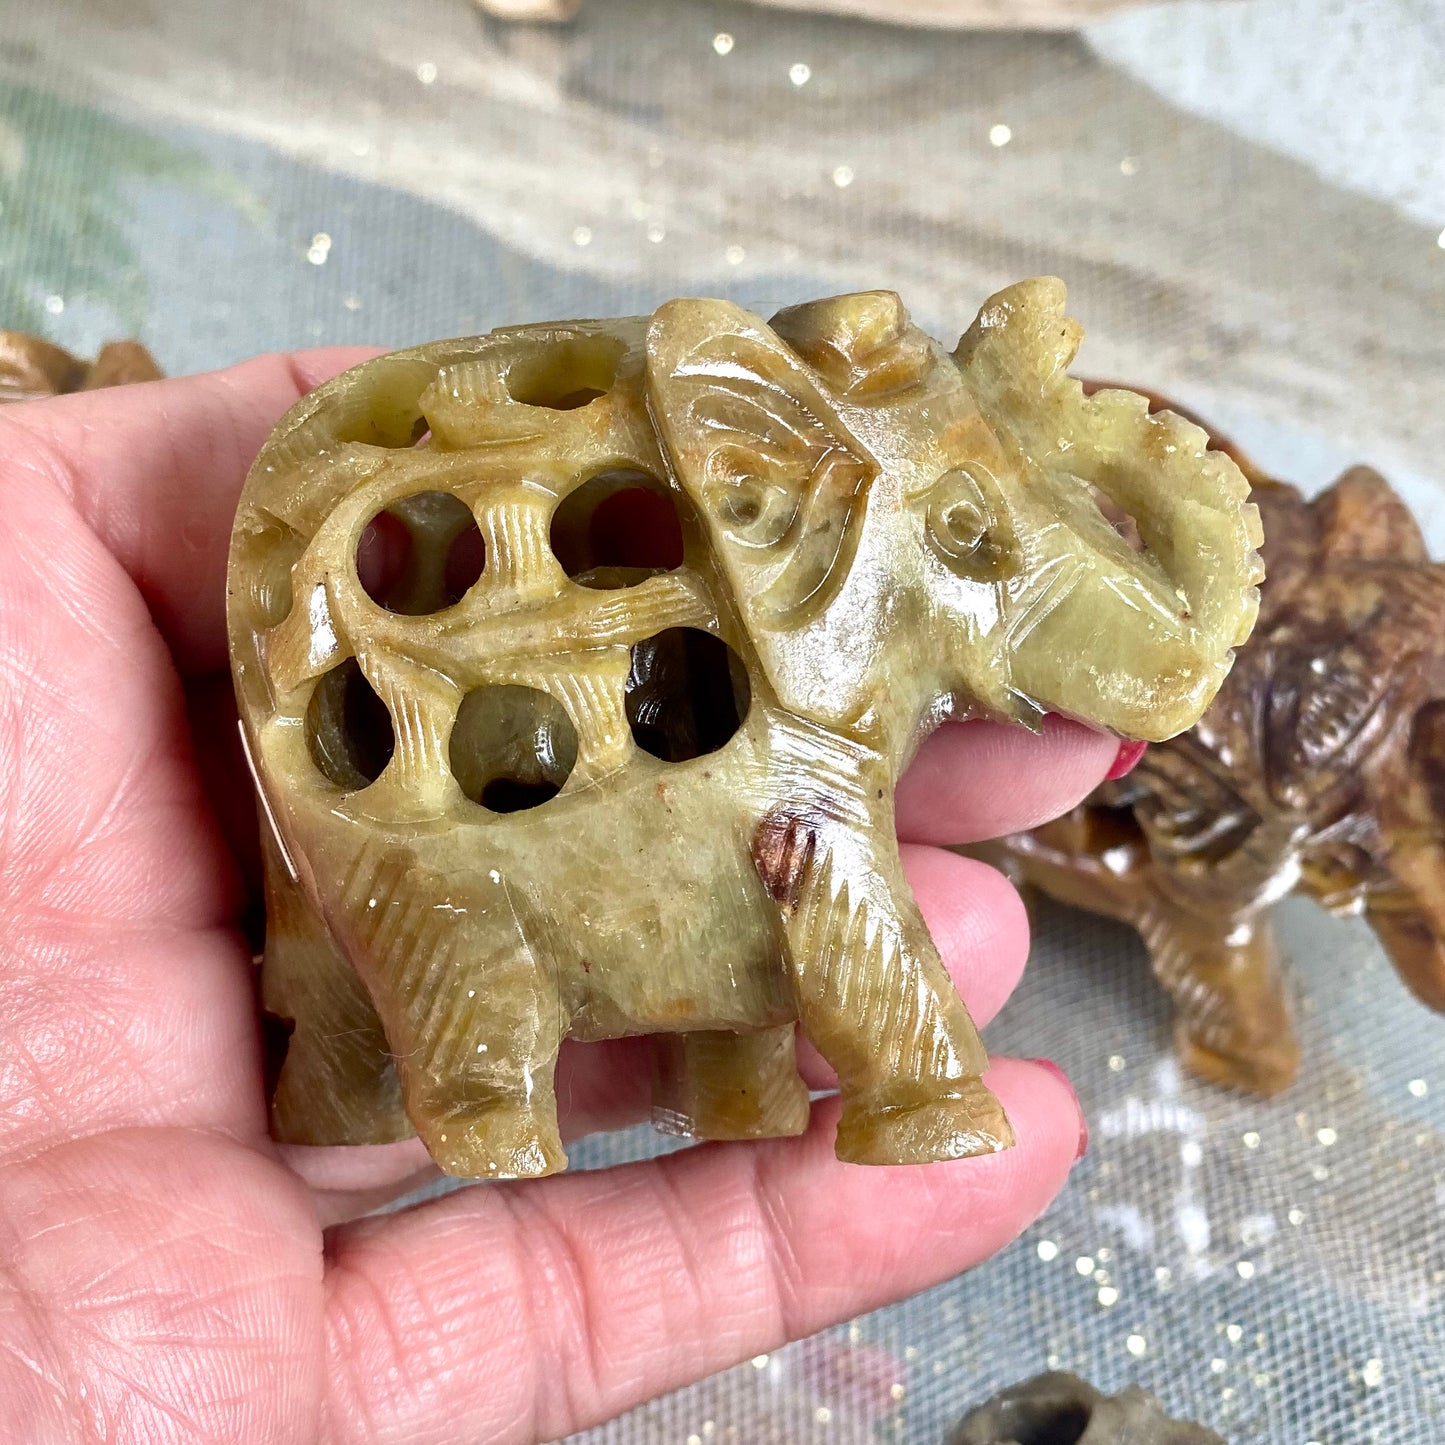 Intricate India Soapstone Elephant with Baby Inside for Peace and Calming